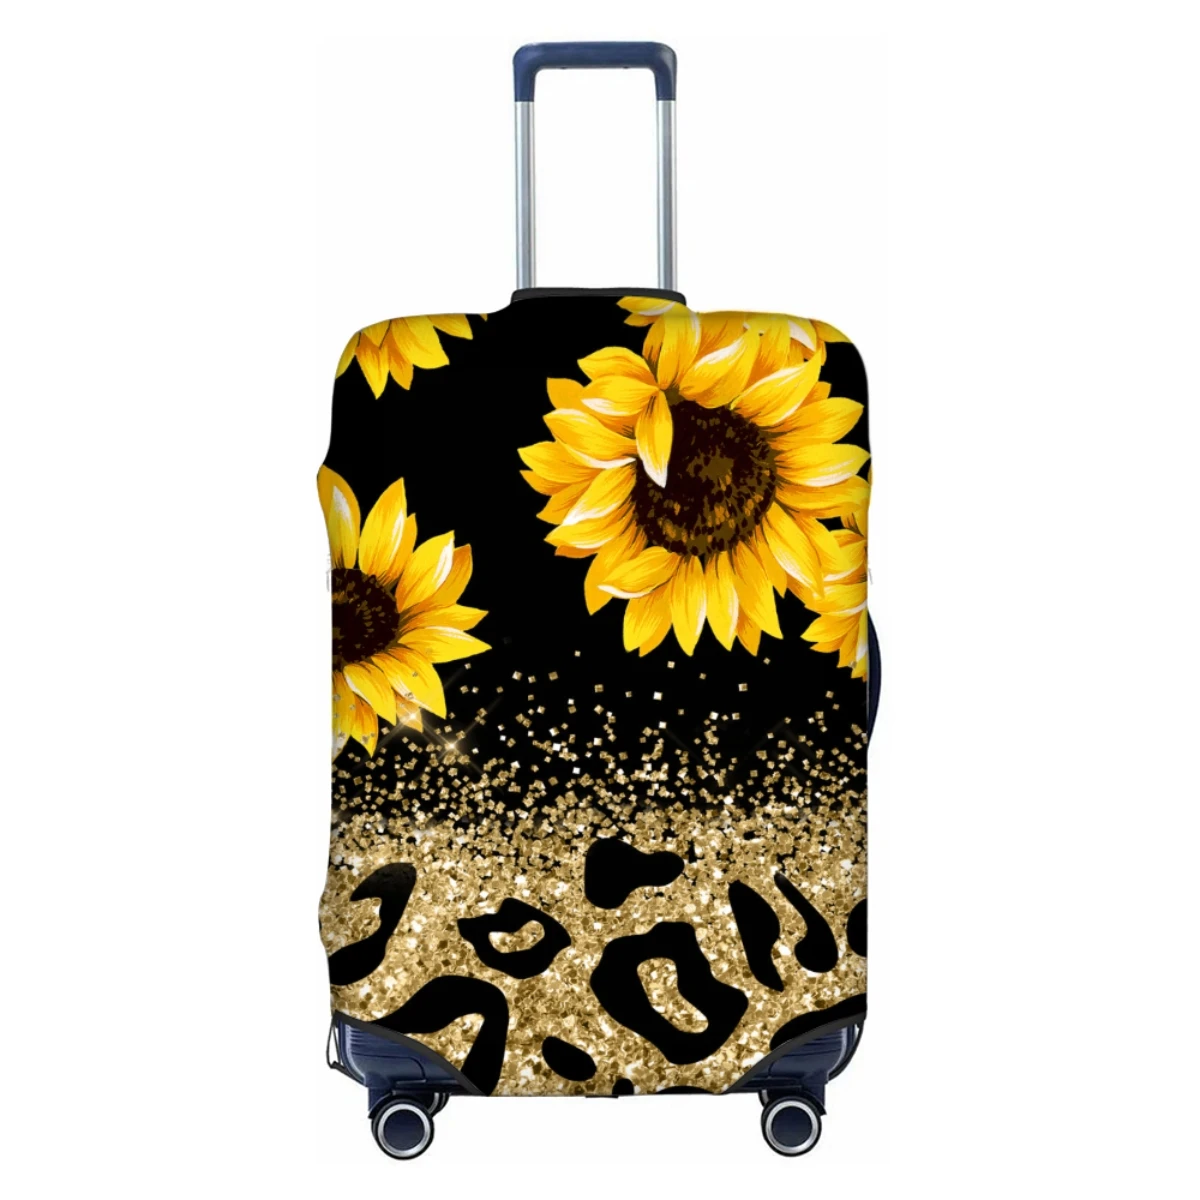 

Personality Travel Accessory Luggage Covers High Elastic Fabric Protects Luggage From Dust And Scratches 18-32in Suitcase Cover